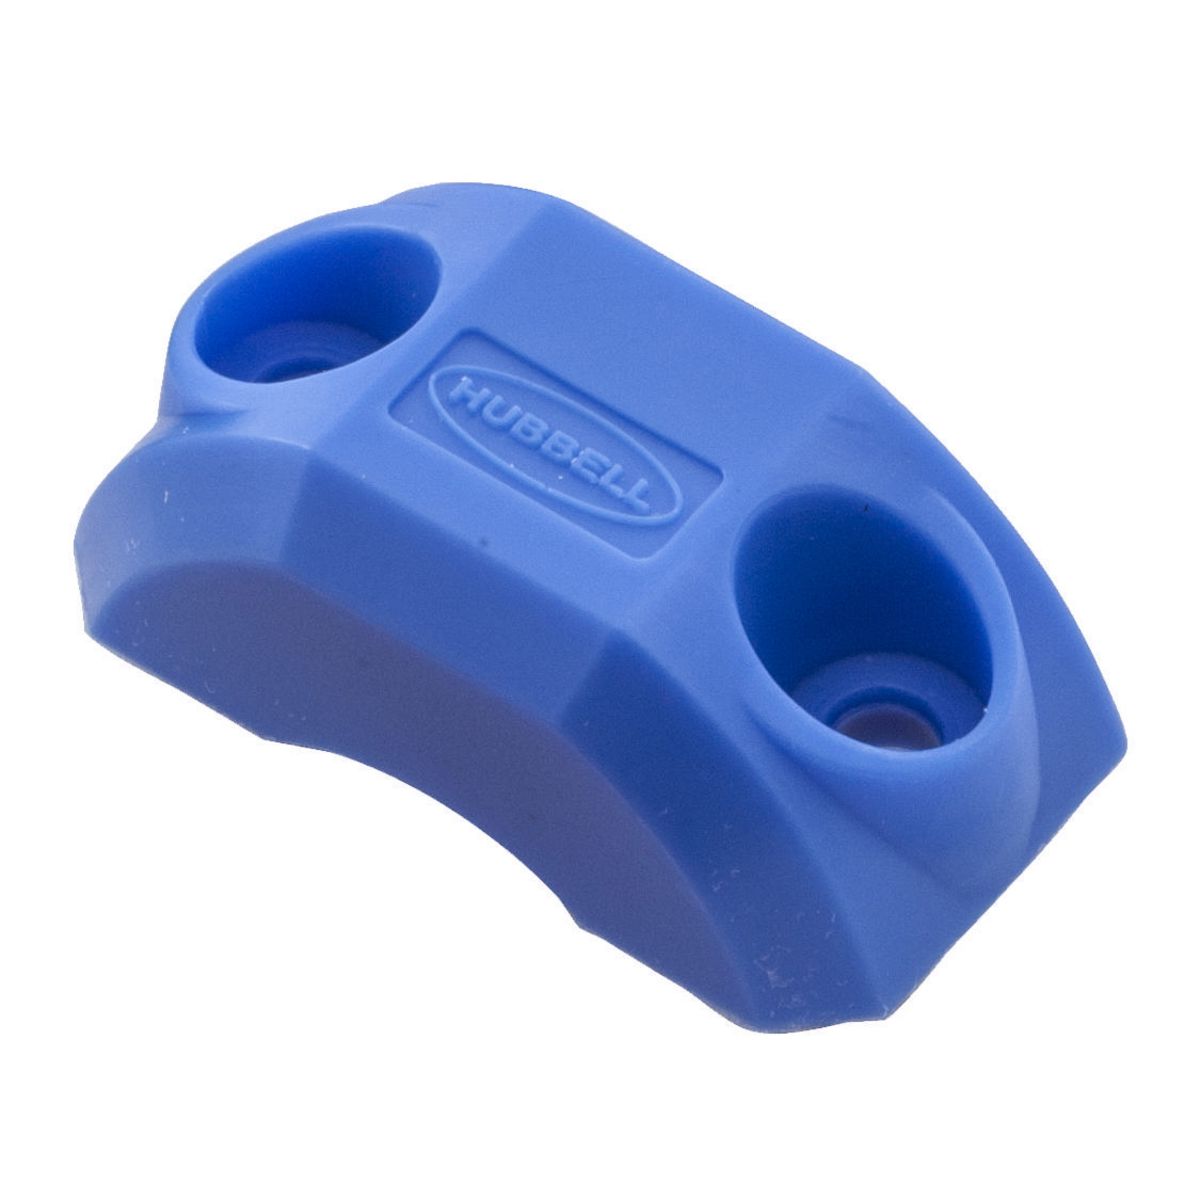 INSULGRIP SIZE 1 CORD CLAMP BLUE